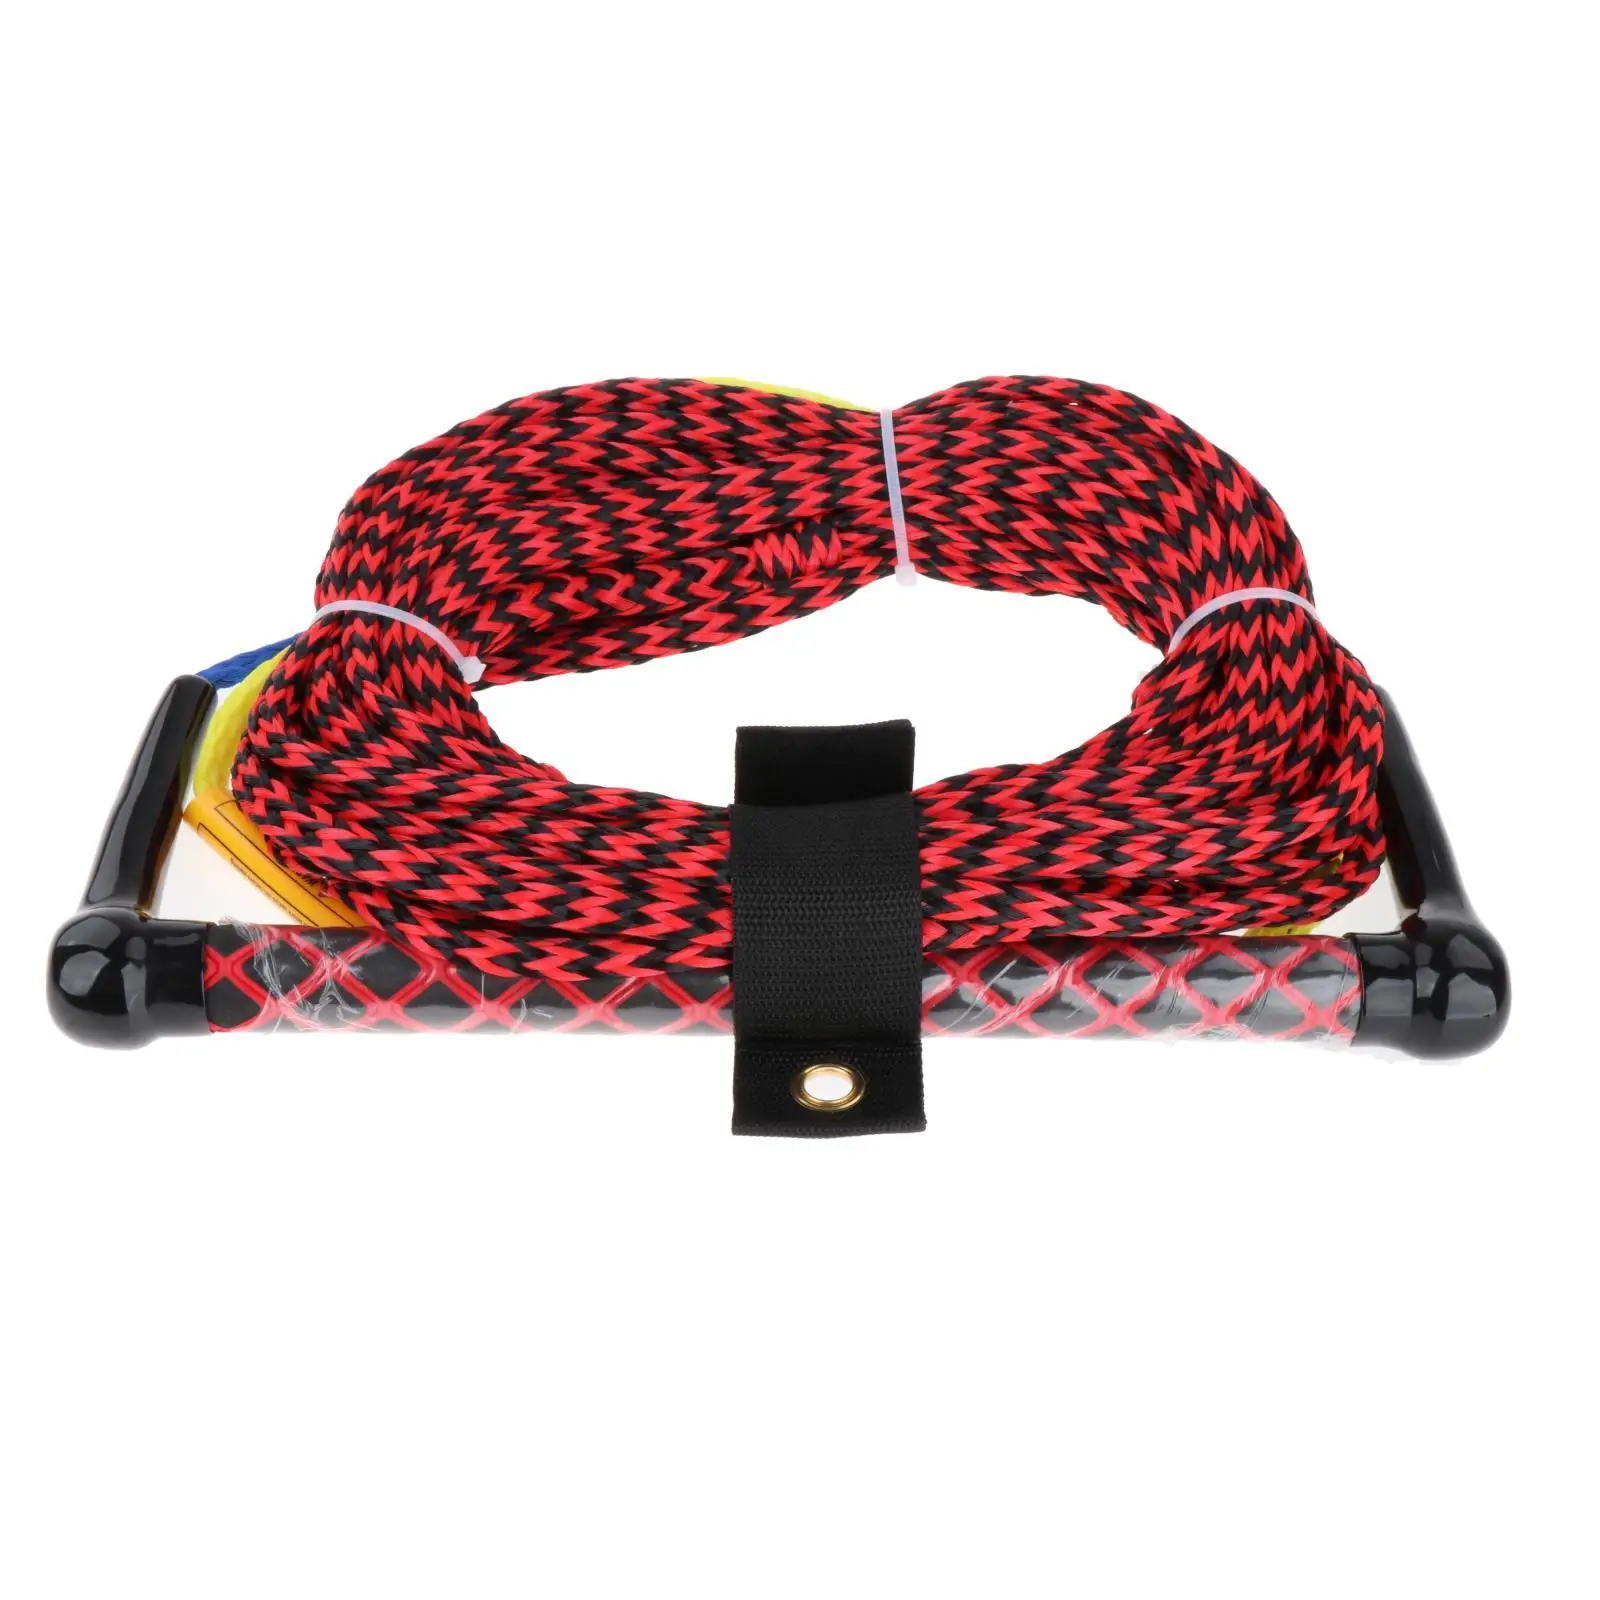 Water Skiing Surfing Rope Floating Accessories 75ft for WakeSurf Kneeboard Training